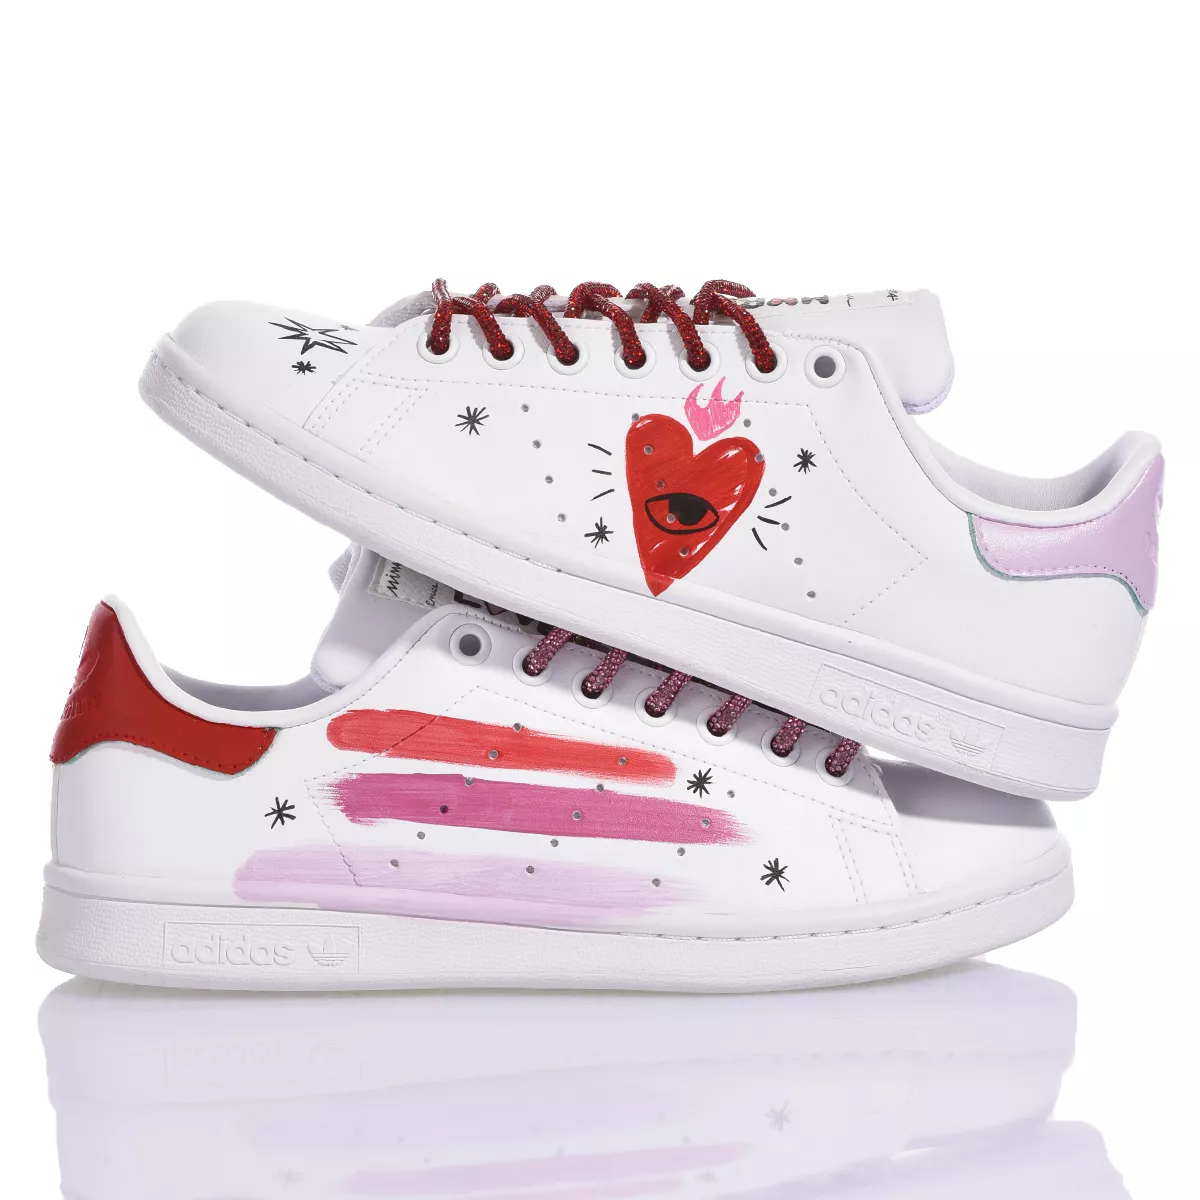 Adidas Stan Smith More Love by Enrica Mannari Stan Smith Painted, Special